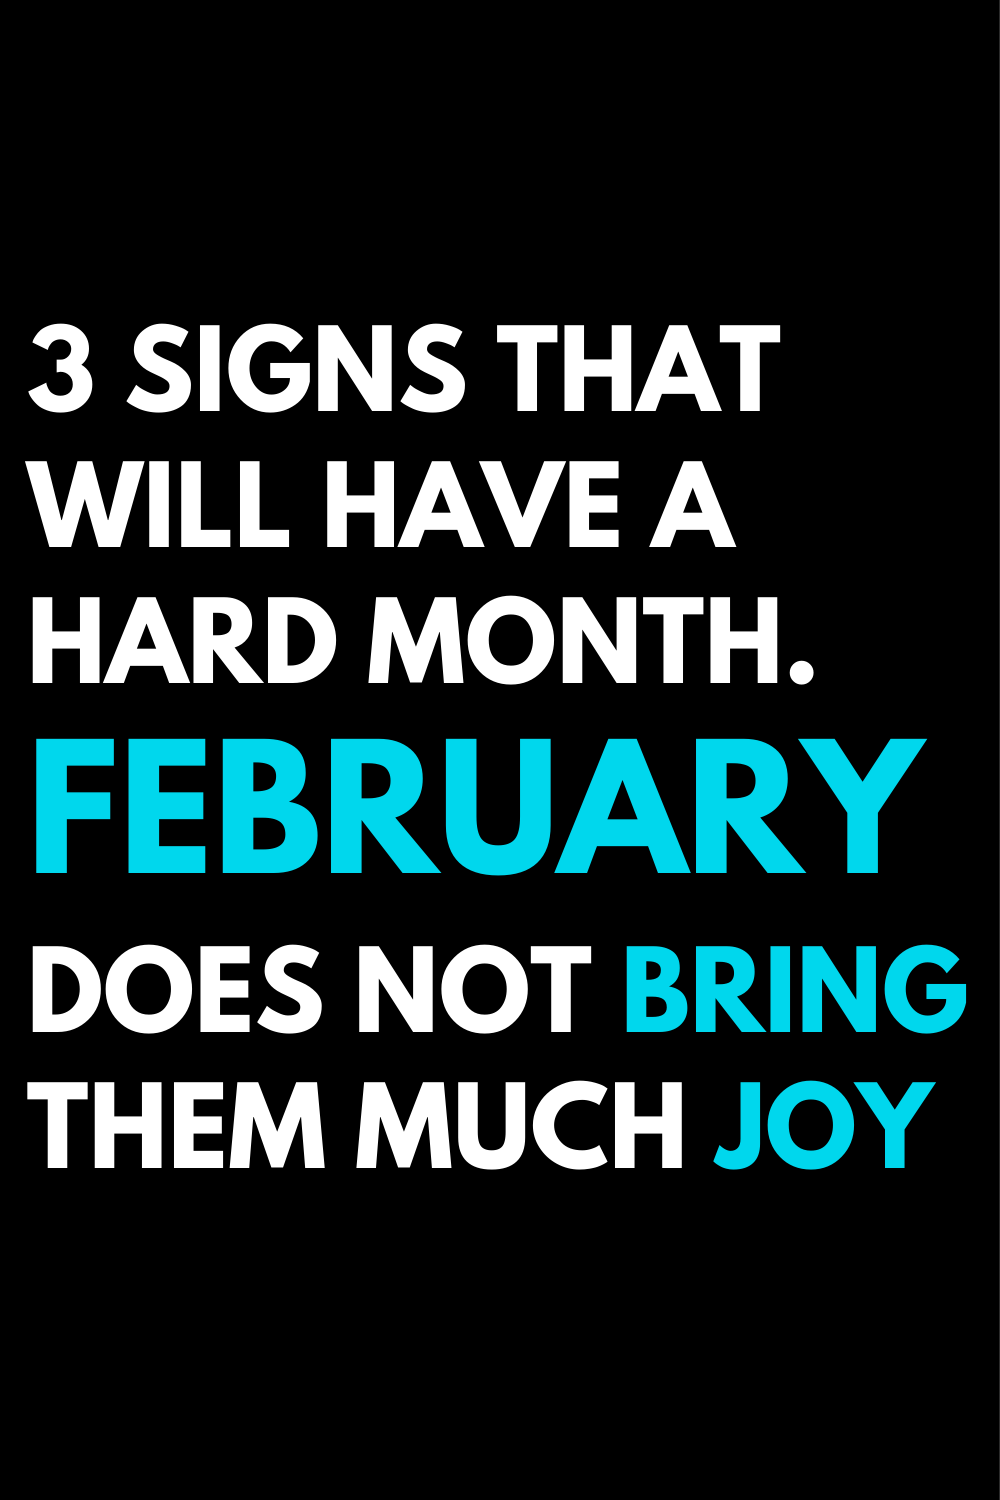 3 signs that will have a hard month. February does not bring them much joy